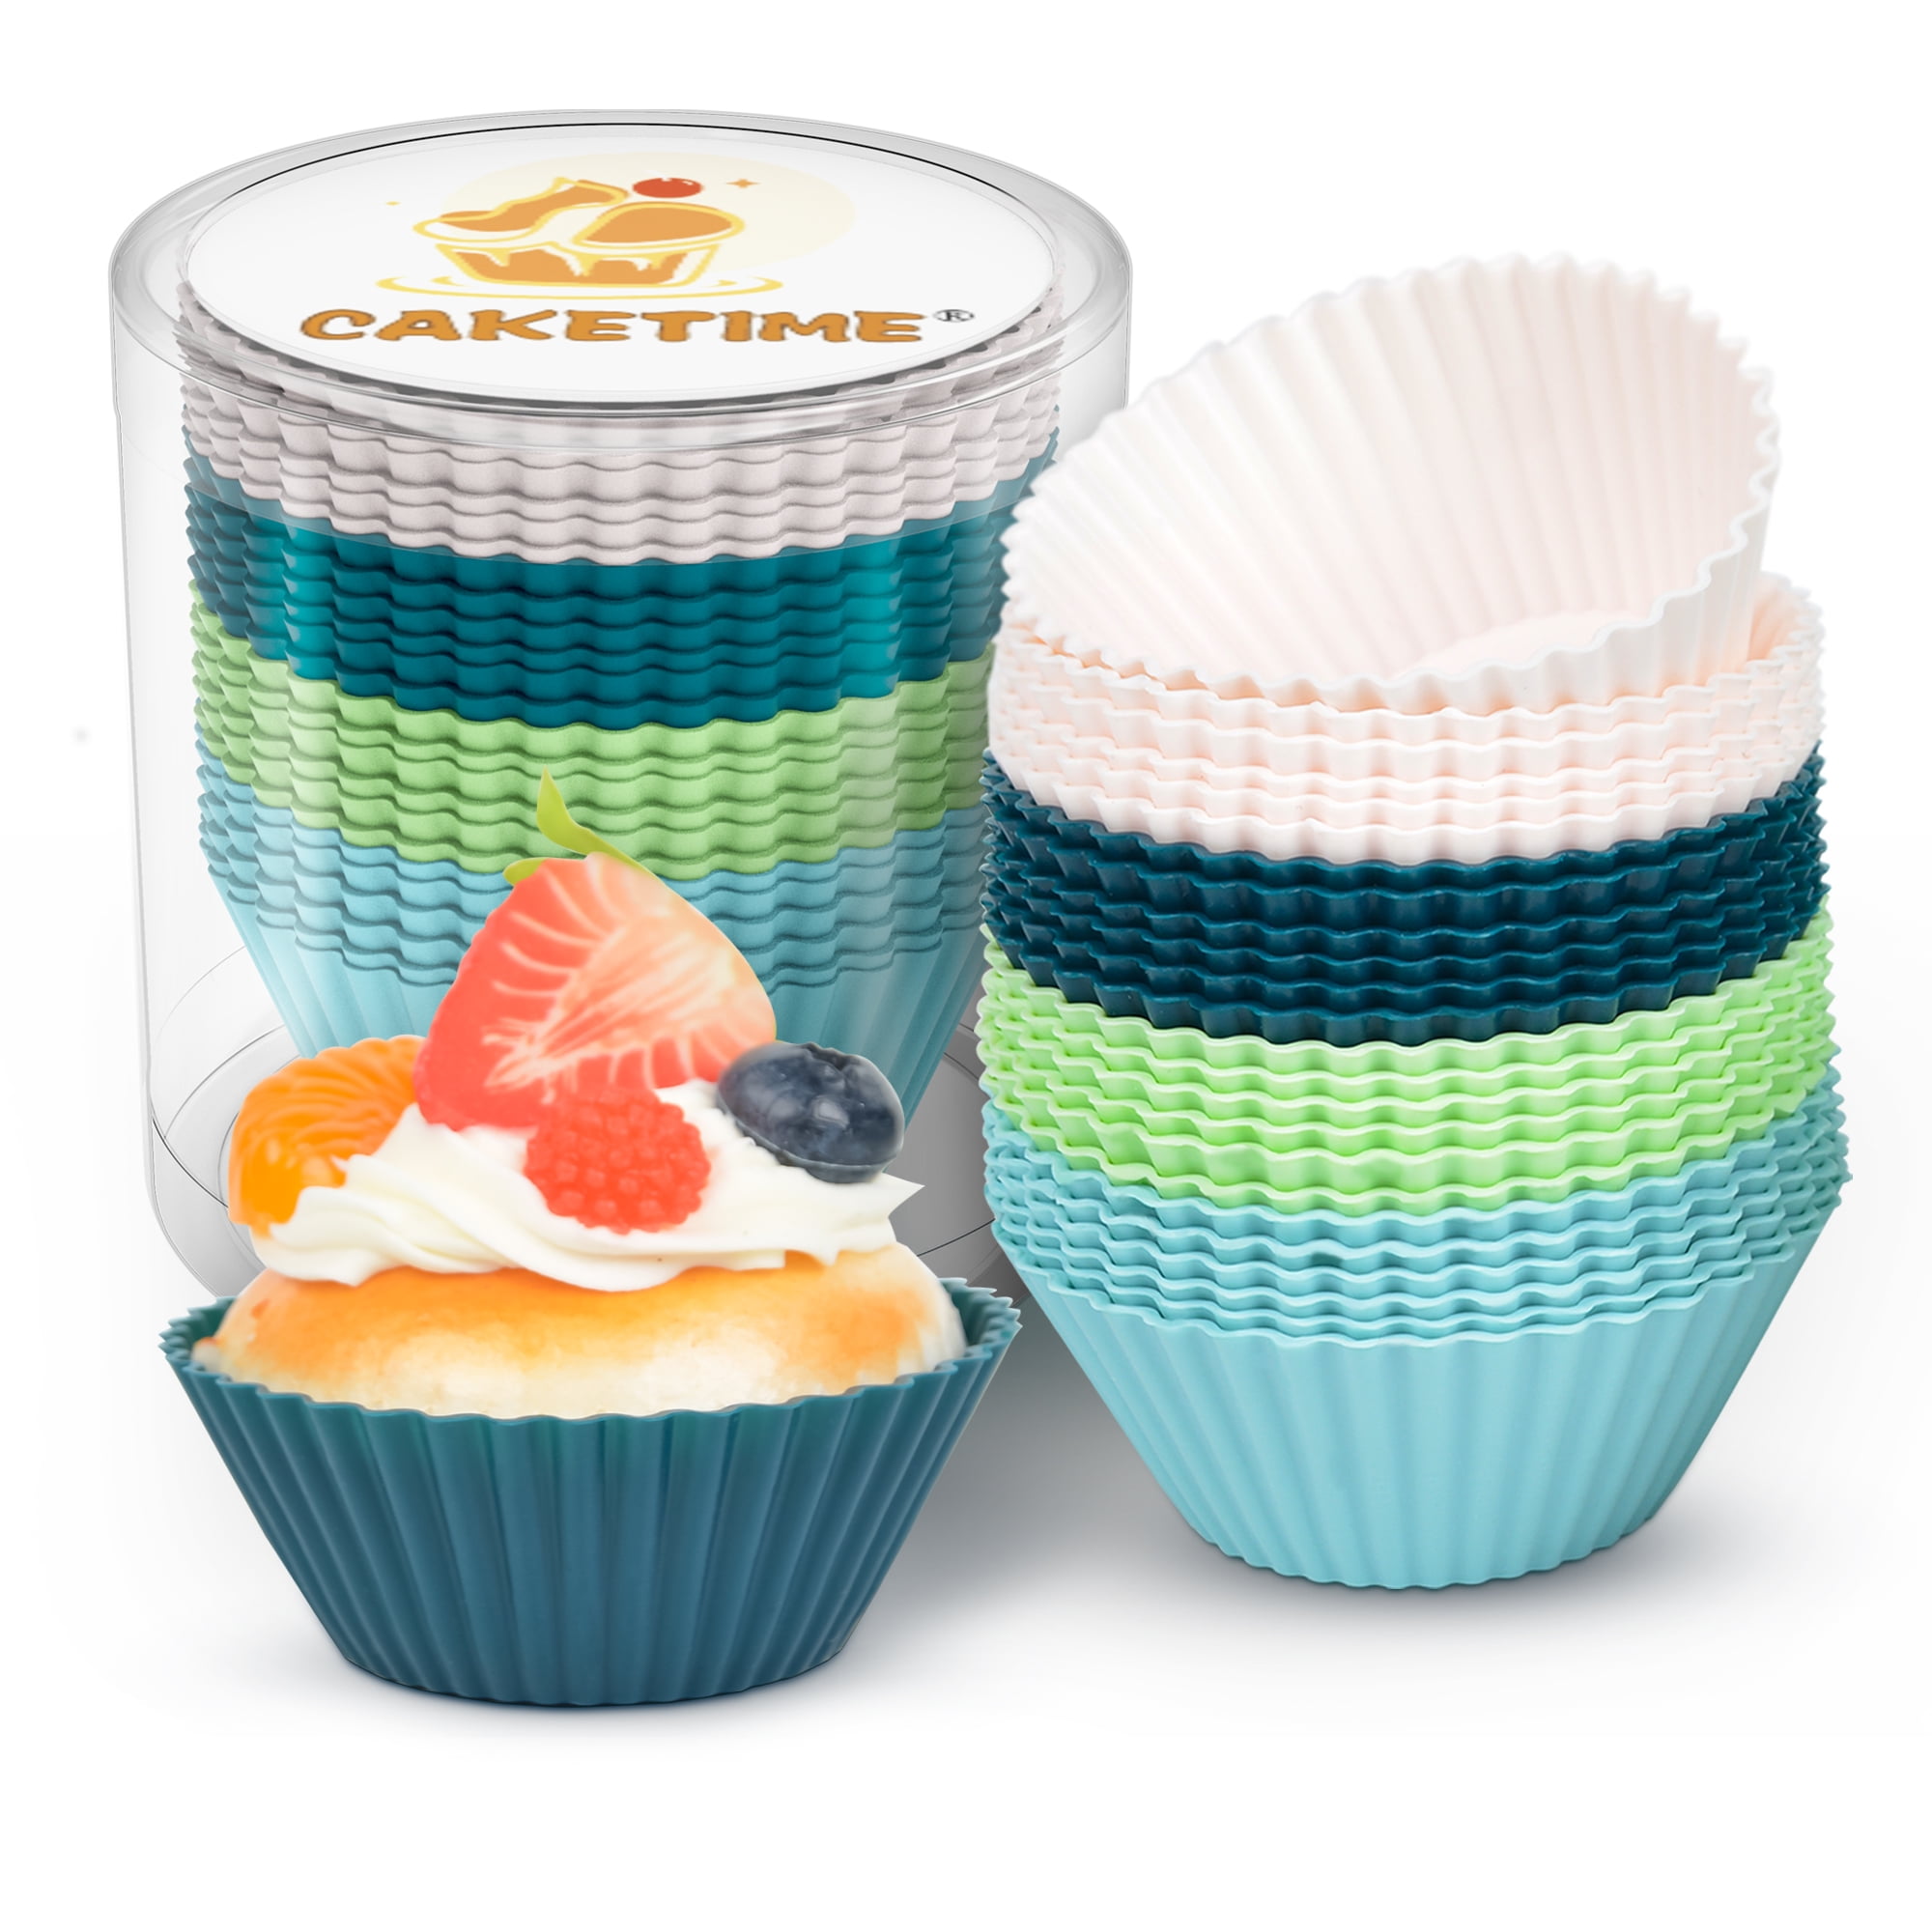 Norpro, White, Giant Muffin Cups, Pack Of 500 : Target